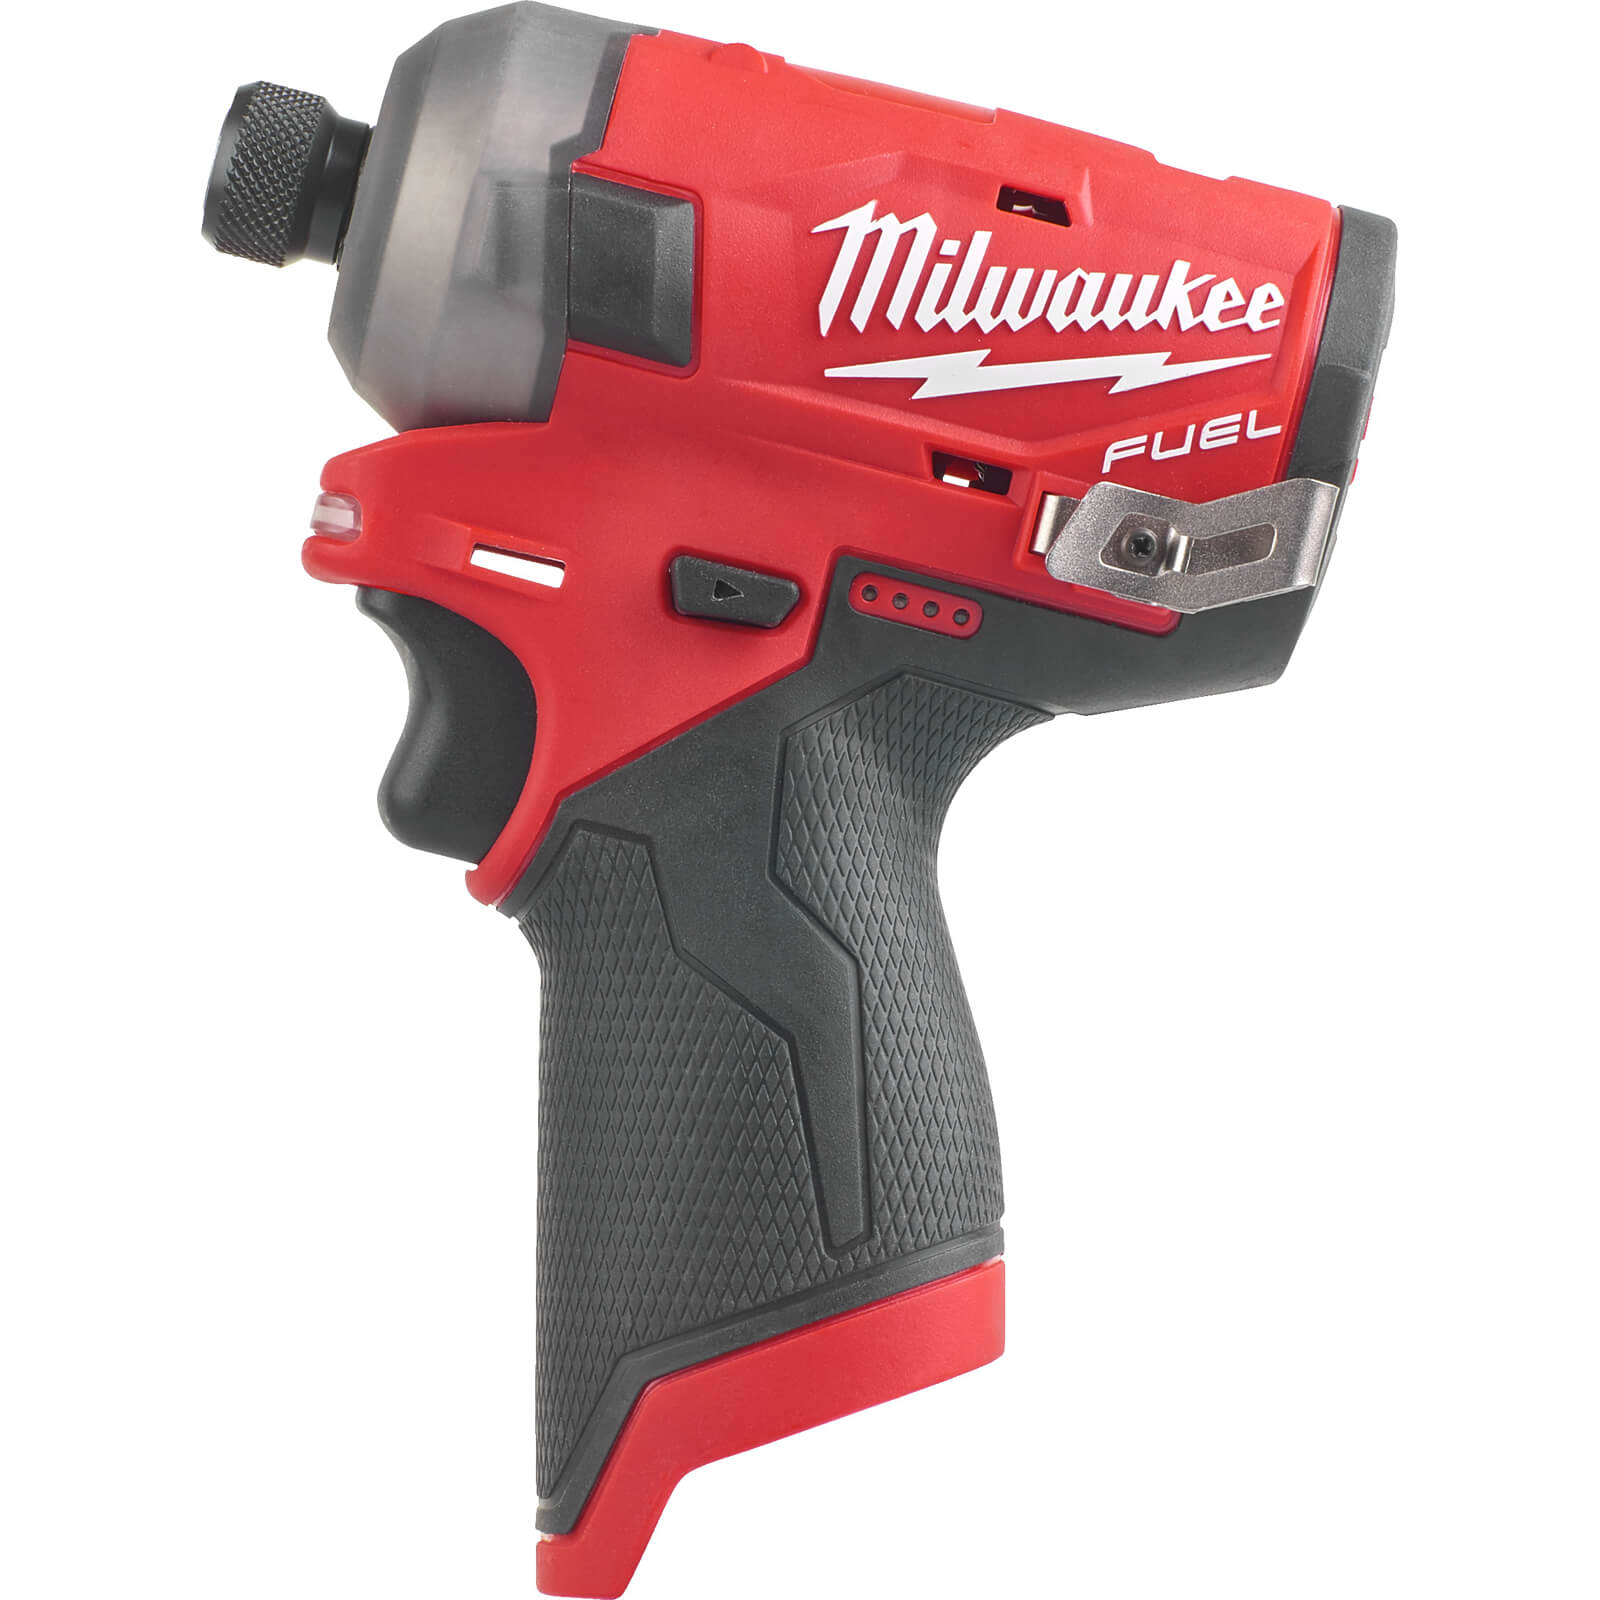 Image of Milwaukee M12 FQID Fuel 12v Cordless Brushless Surge Hydraulic Impact Driver No Batteries No Charger No Case